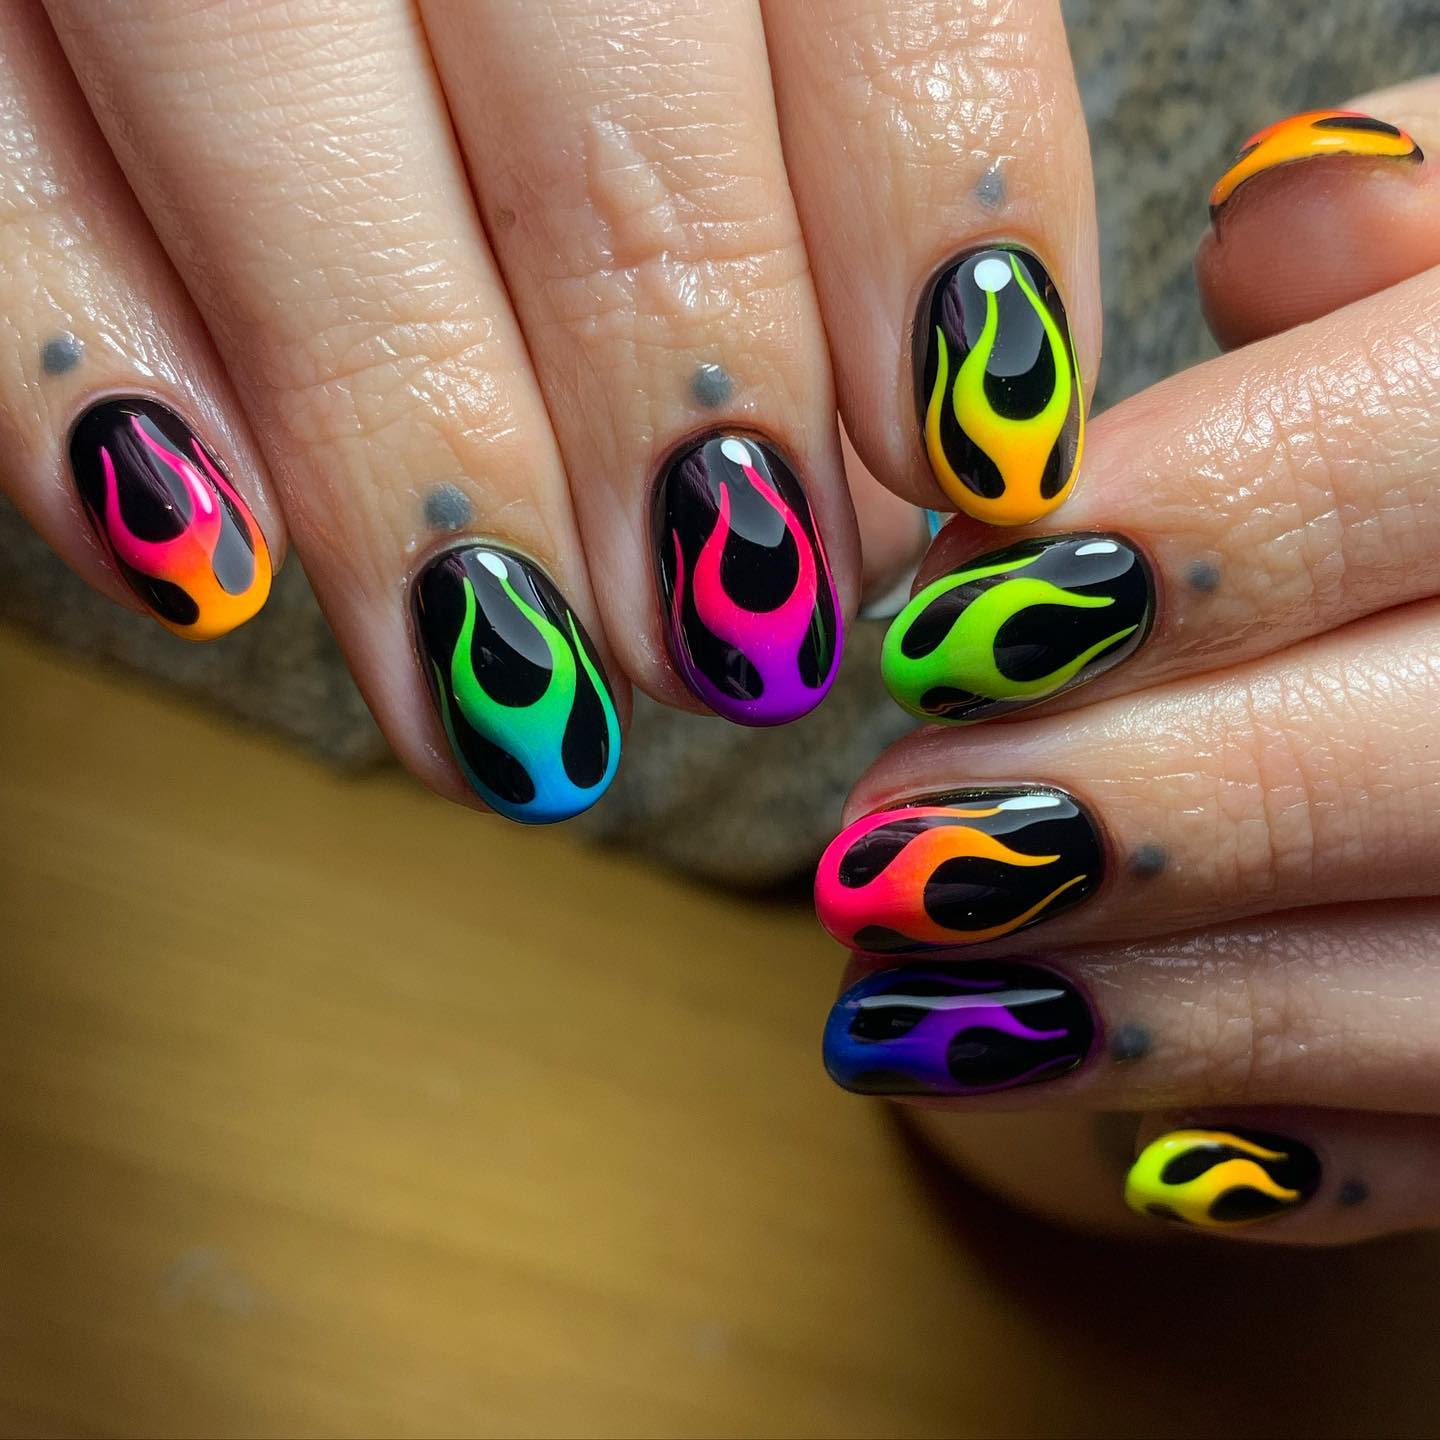 Short Black Nails with Neon Rainbow Flame Design